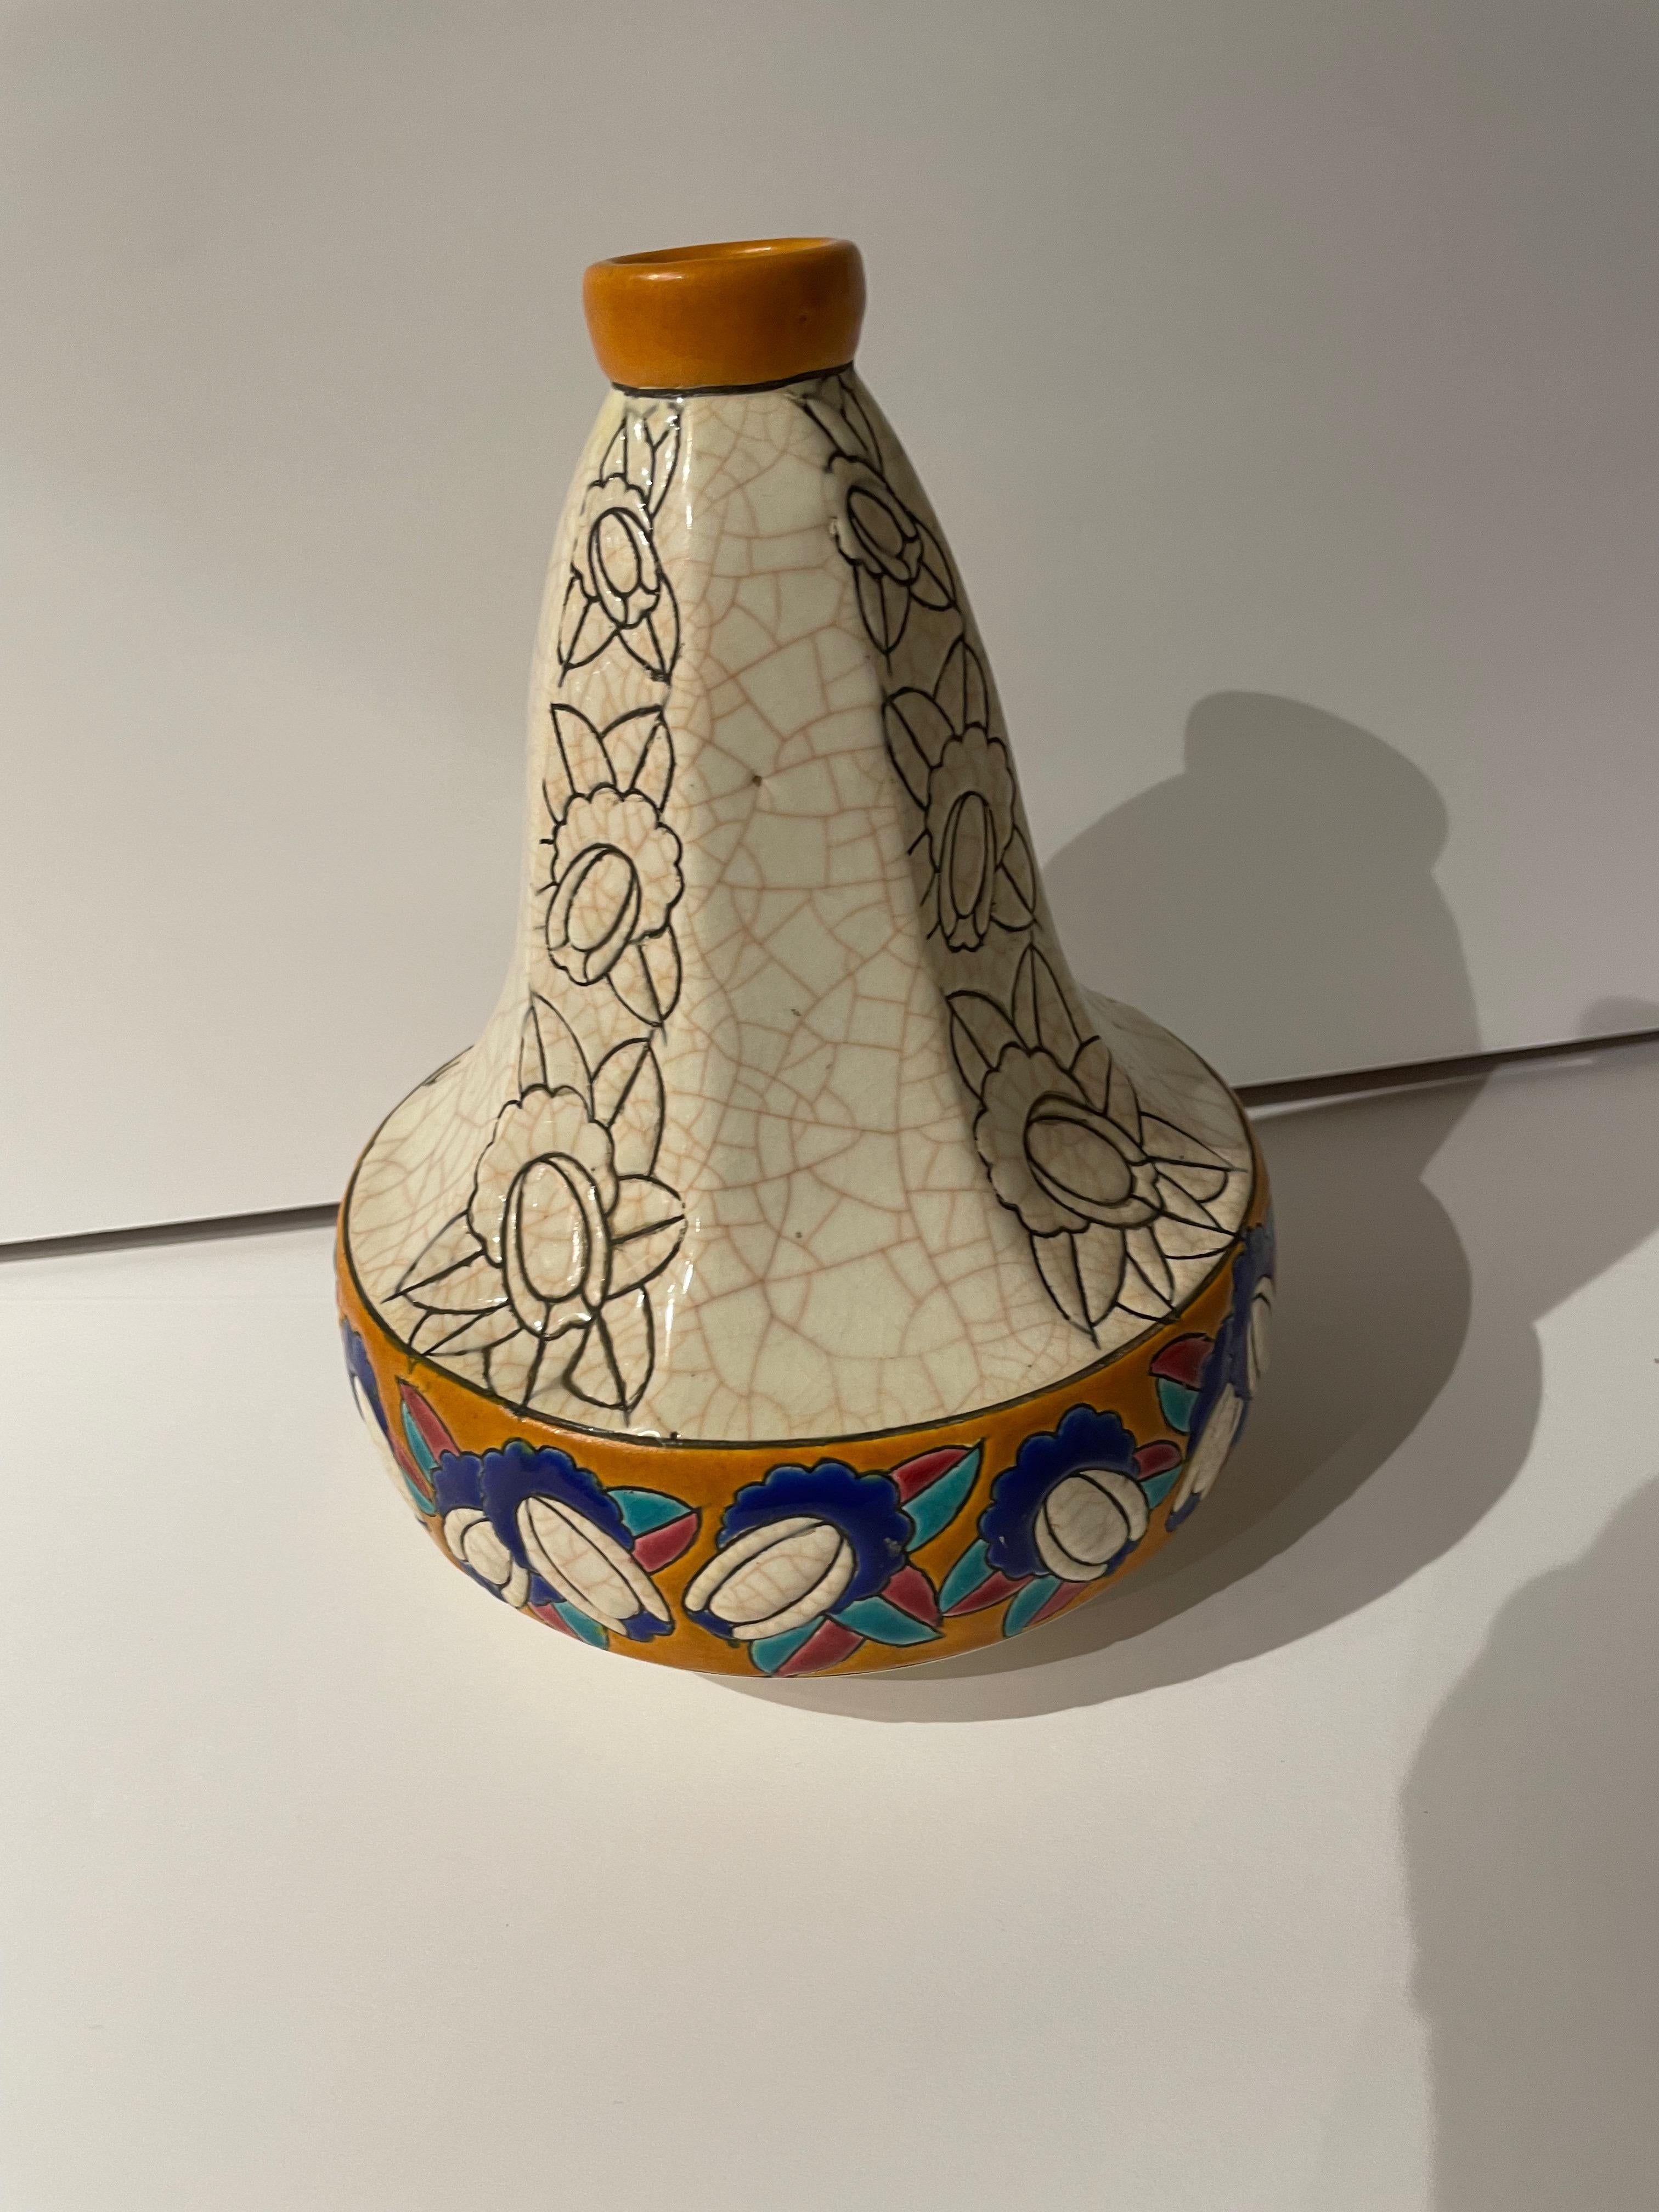 An Art Deco Vase from Longwy of France in the distinctive “pyriform” -pear or gourd shape that so many of their creations employed. Smooth, faceted sides alternate with deeply etched designs and lead down to the decorative border of geometric